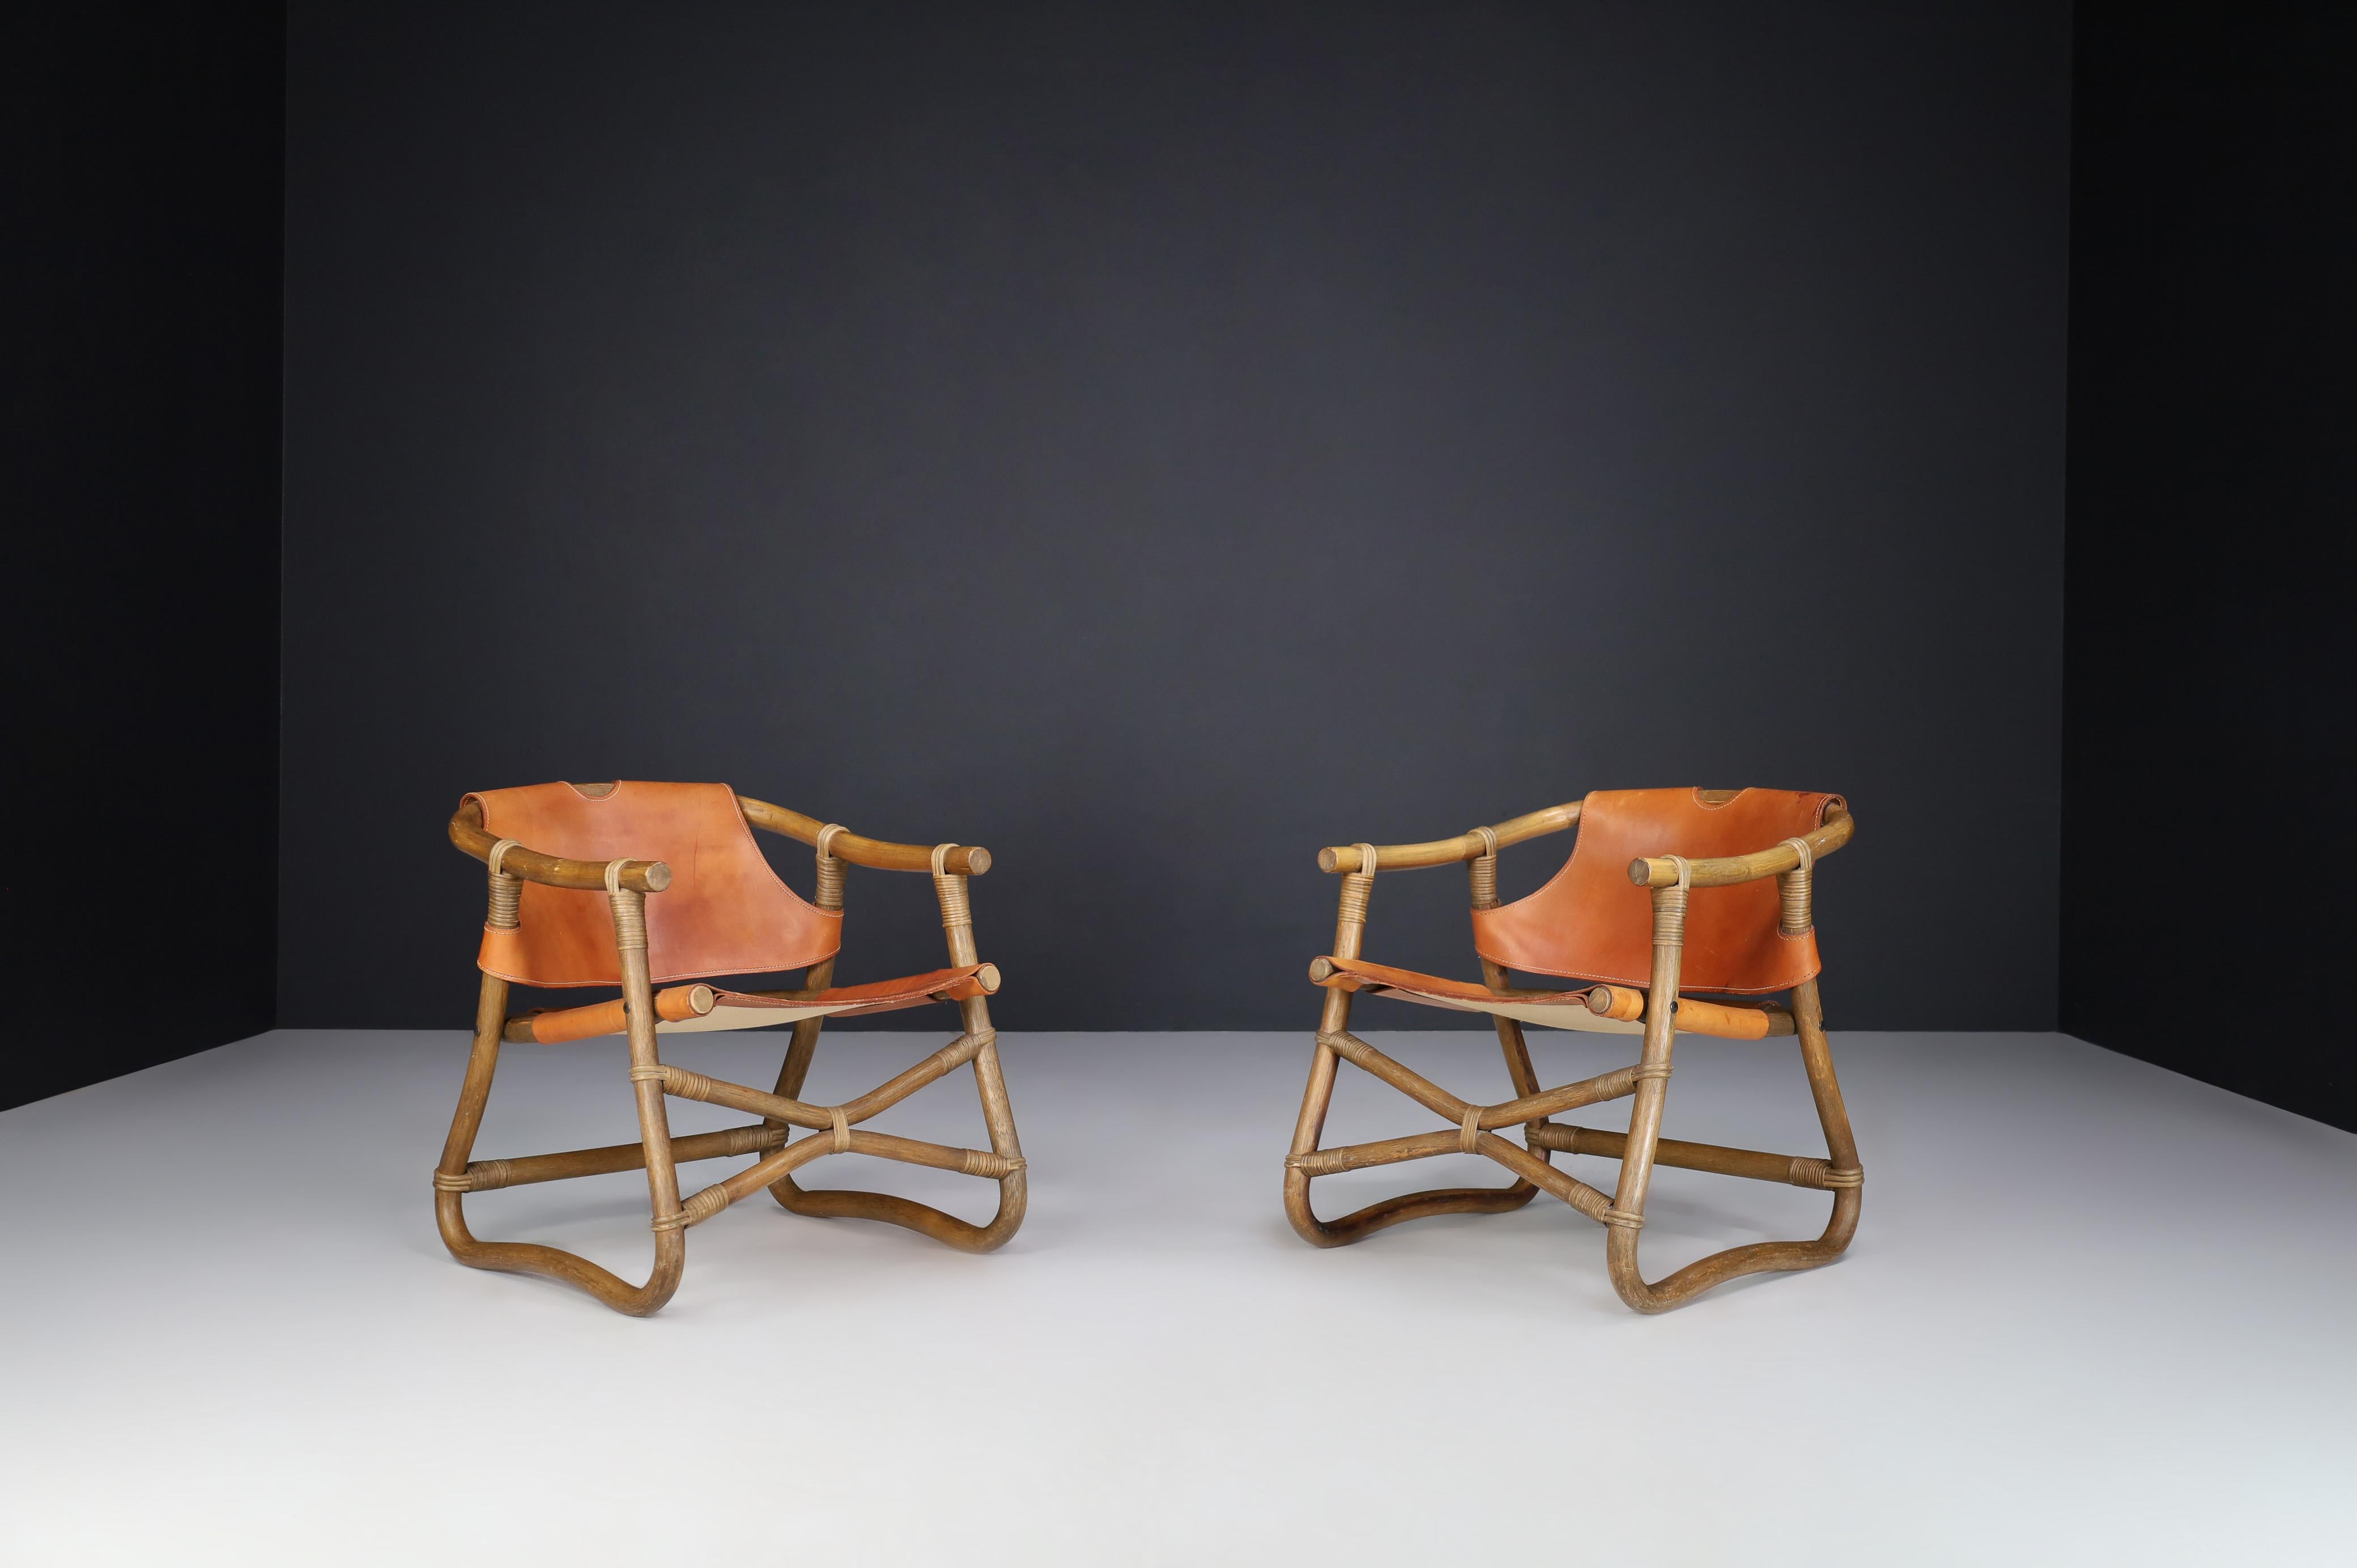 Cognac leather Esprit safari lounge Chairs by IKEA Sweden 1970s.

Ikea designed this safari Lounge chair in the 1970s. It is made of bamboo and cognac saddle leather. The design and the look and feel of this occasional chair reminded me of what